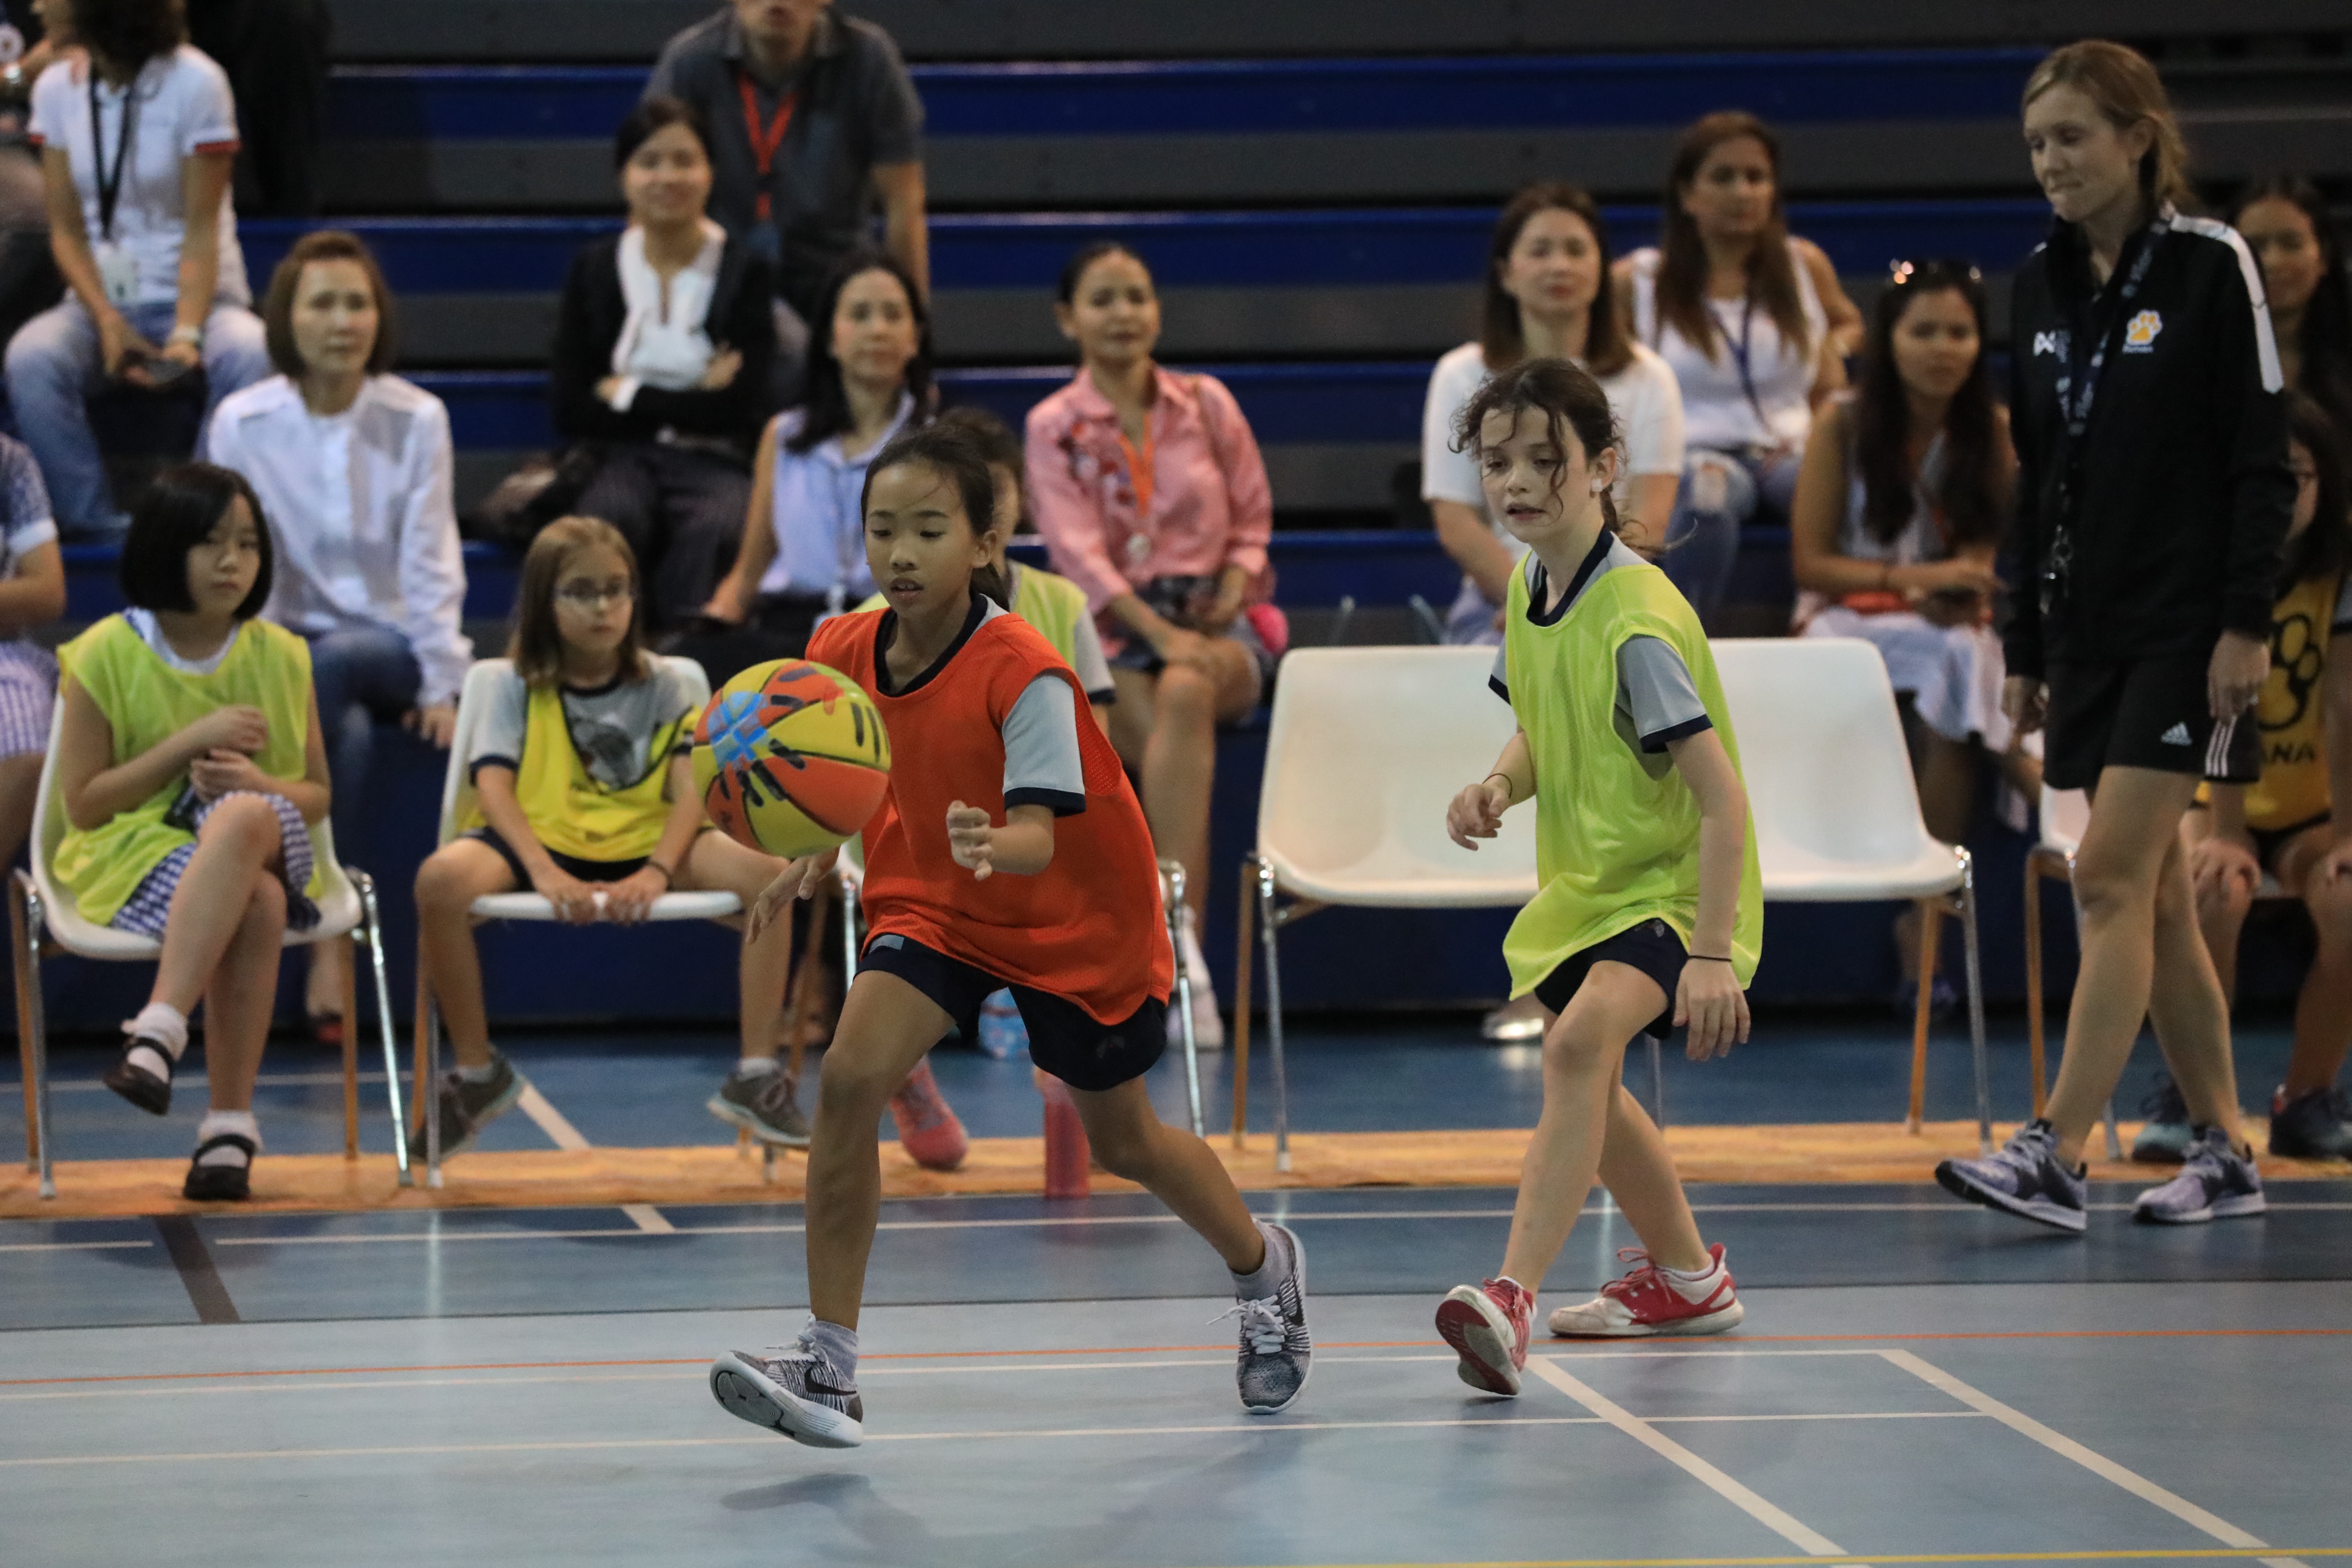 A Basketball Bonanza for Years 5 and 6